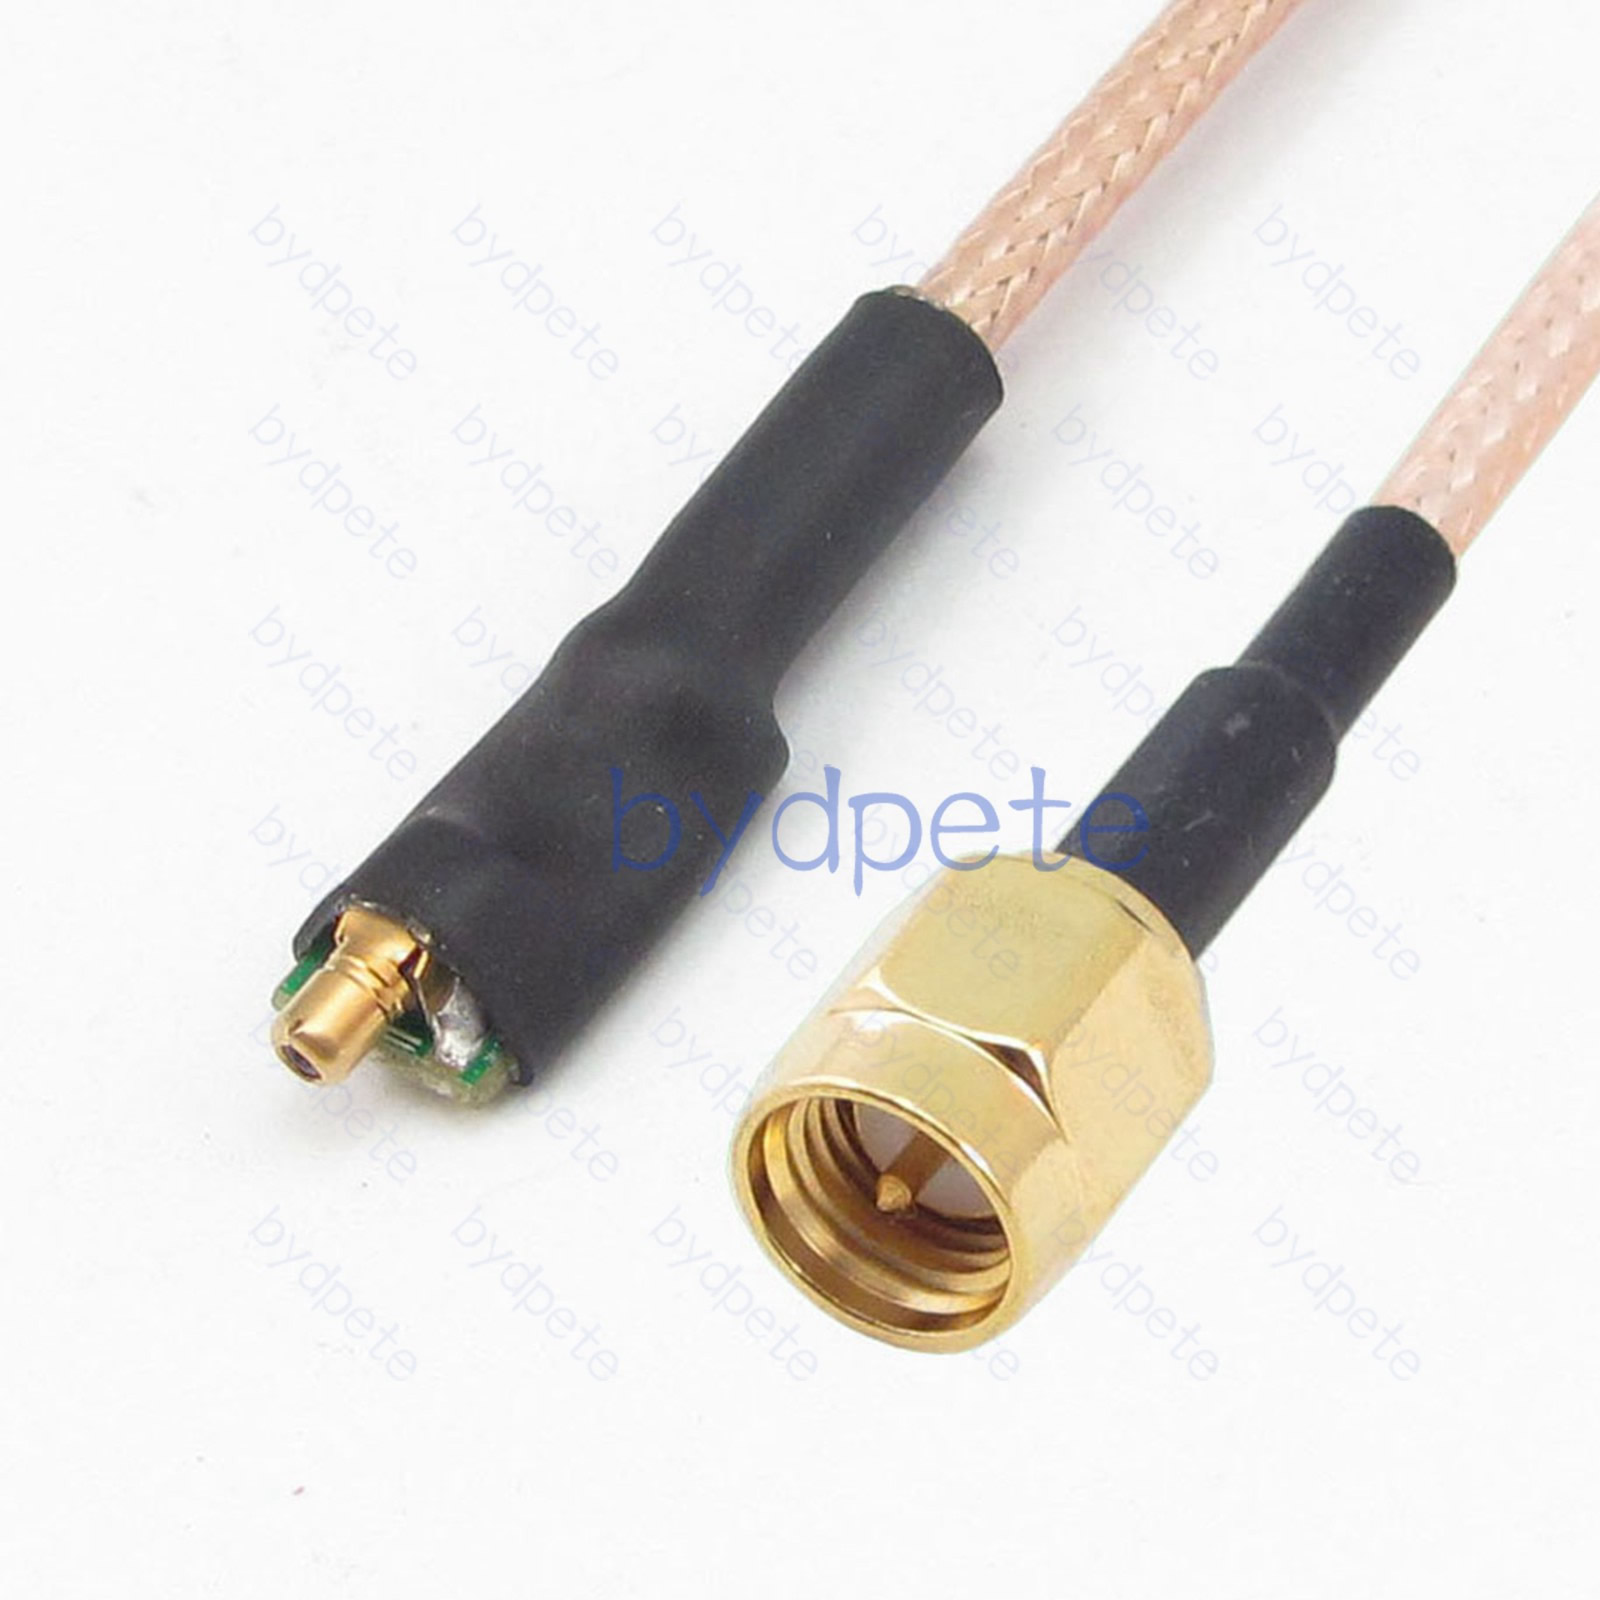 CRC9 female to SMA male plug RG-316 RG316 cable coaxial pigtail coax kable 50ohm BYDC175CRC9316 CRC9-SMA